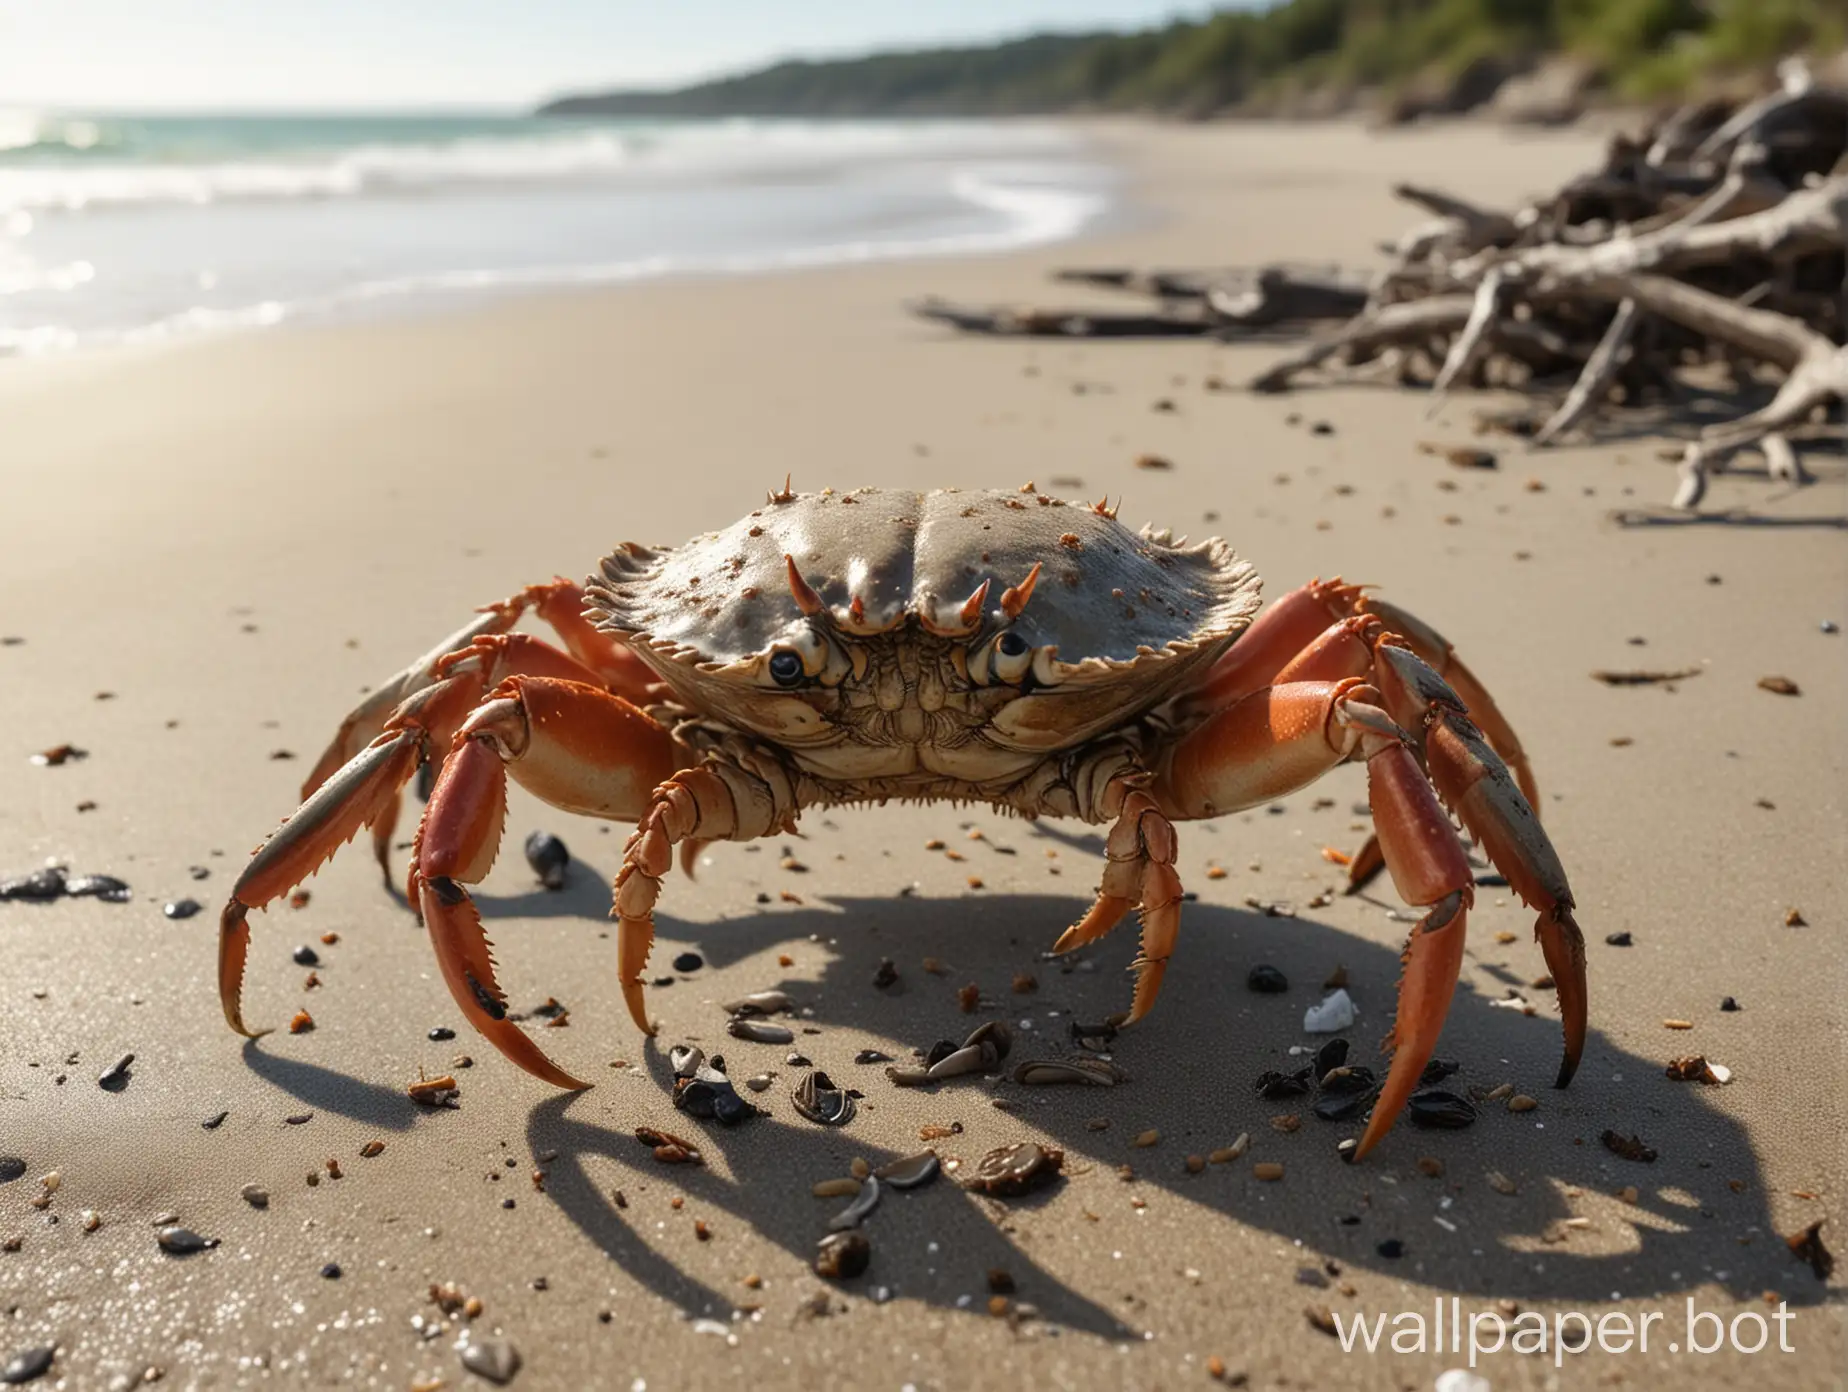 Close up of a crab walking along a deserted beach. The ocean gently washes to shore in the background. The beach is littered with some seaweed and a piece of driftwood. sharp image, high definition, realistic,